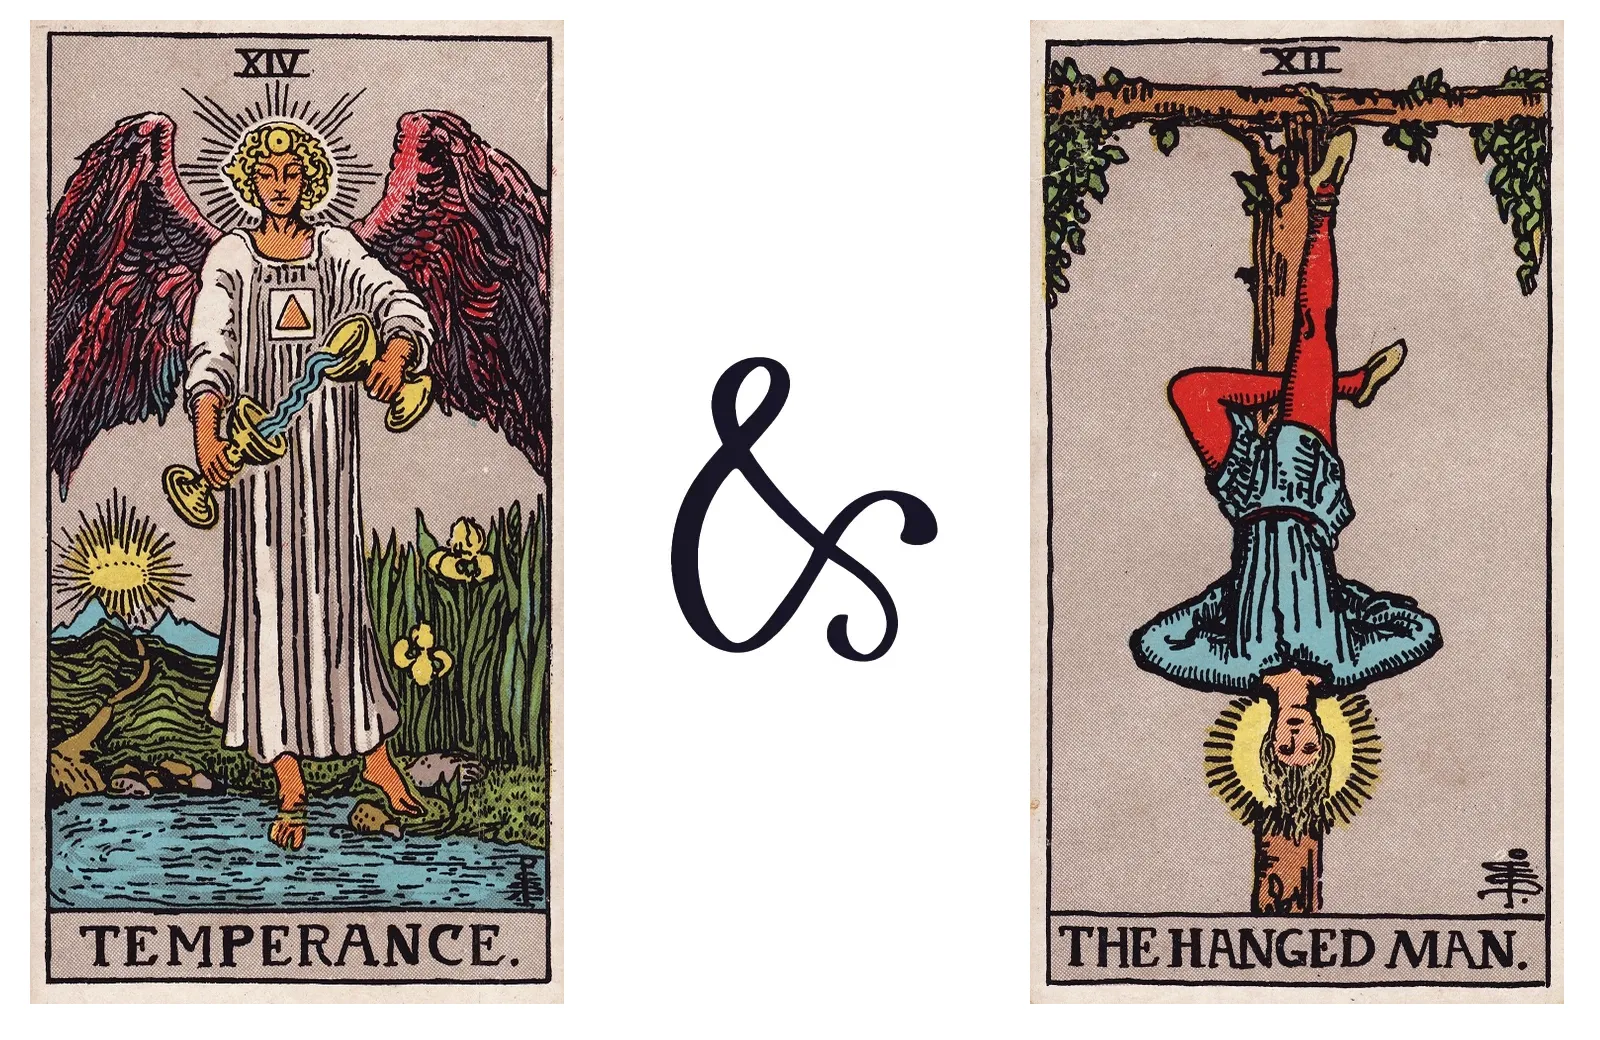 Temperance and The Hanged Man